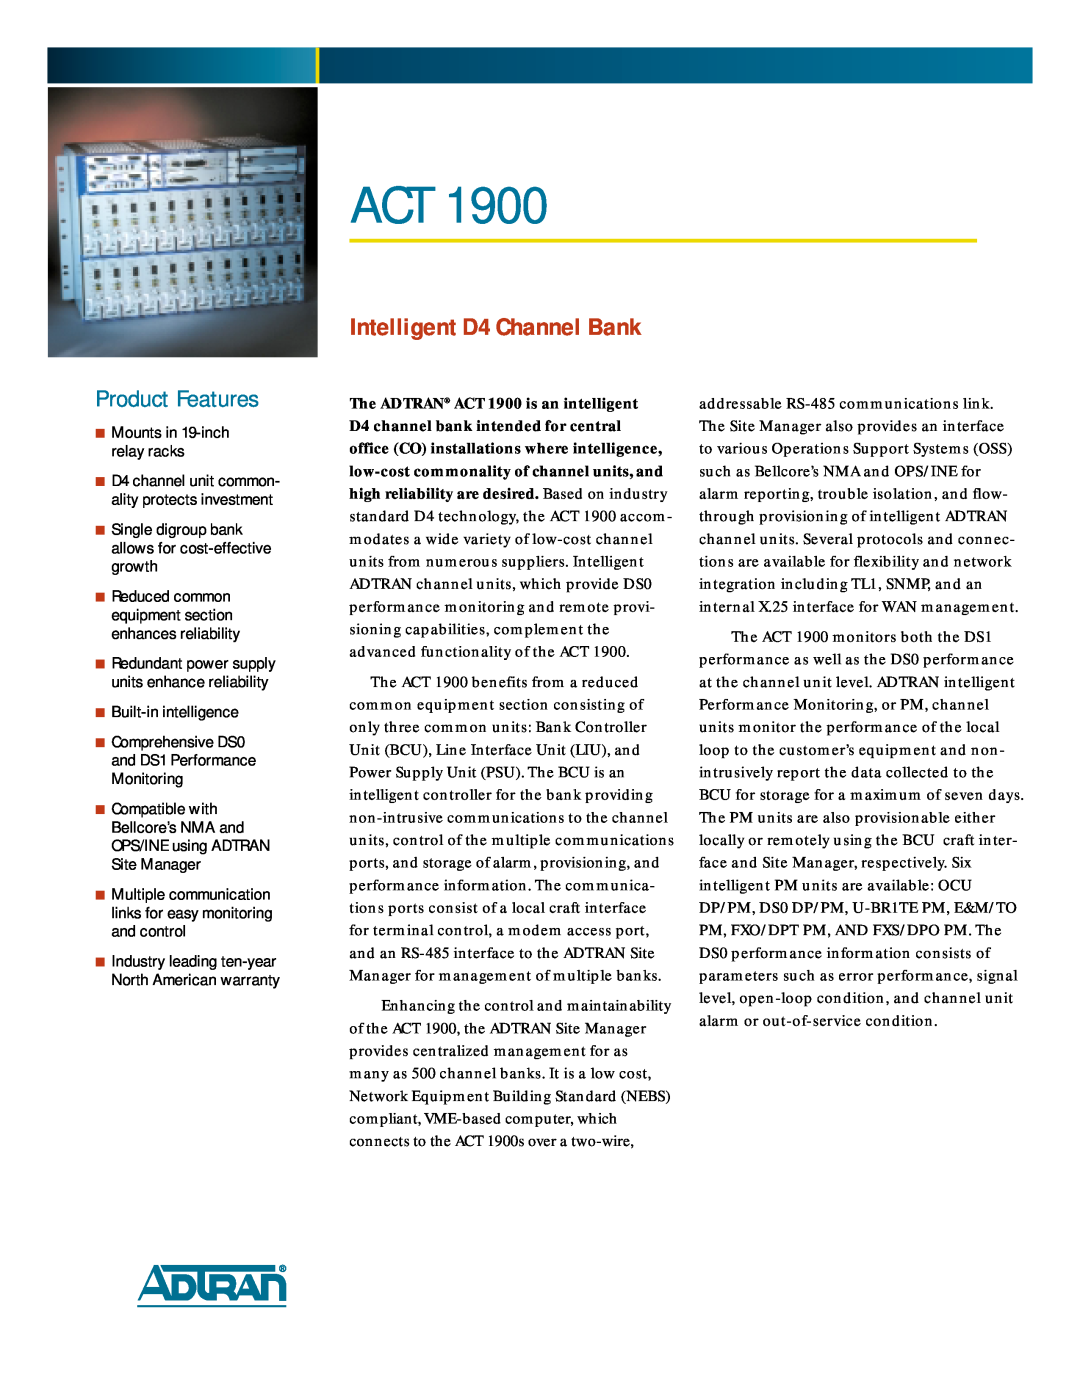 ADTRAN ACT 1900 warranty Product Features, Intelligent D4 Channel Bank, Built-in intelligence 